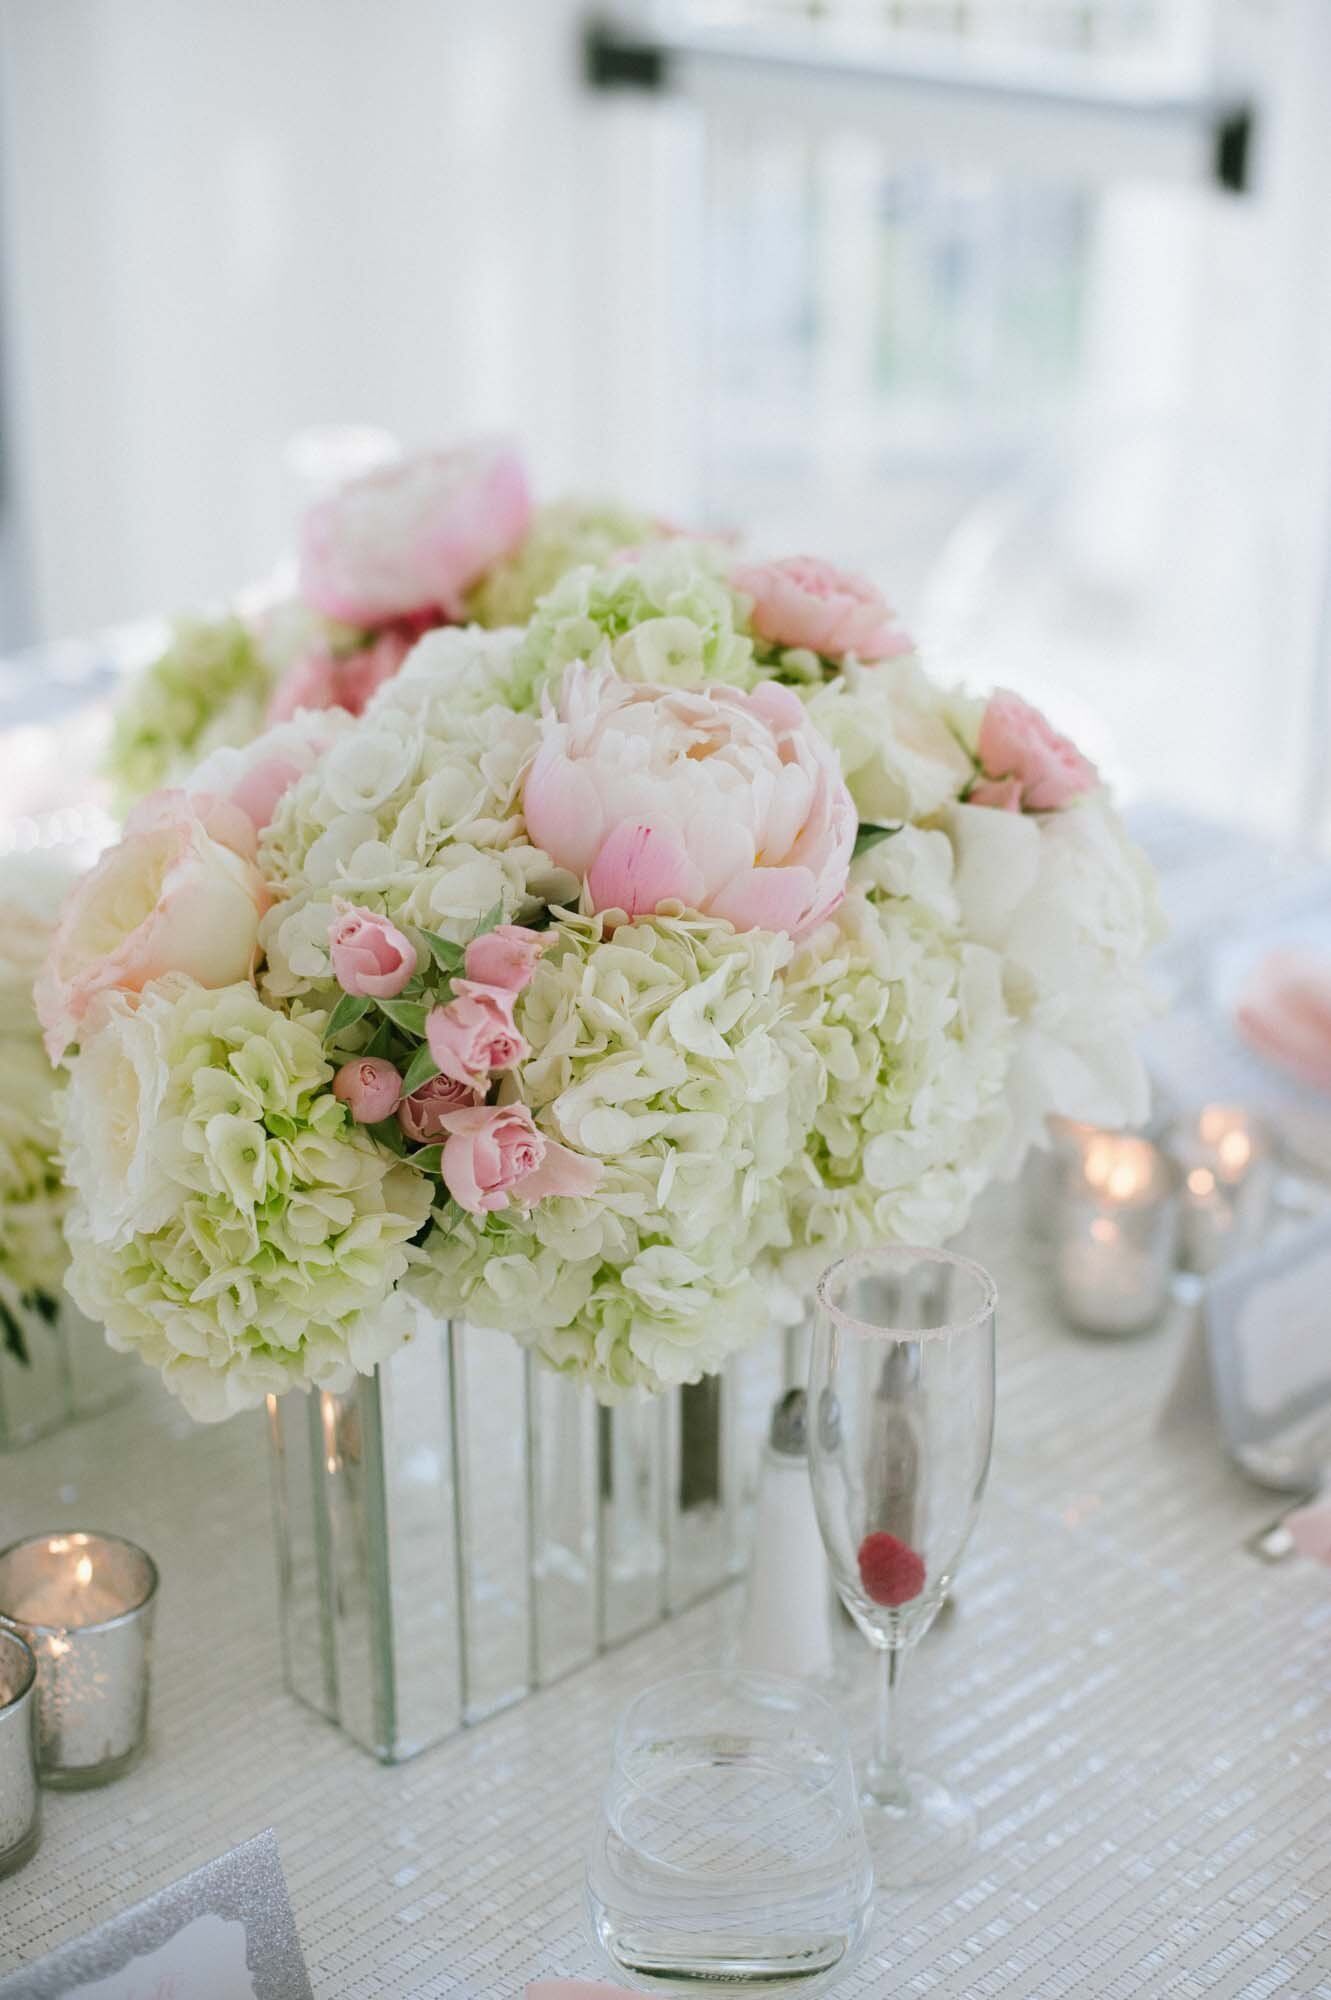 The centerpieces featured a lovely mix of light green hydrangeas, pink and ...